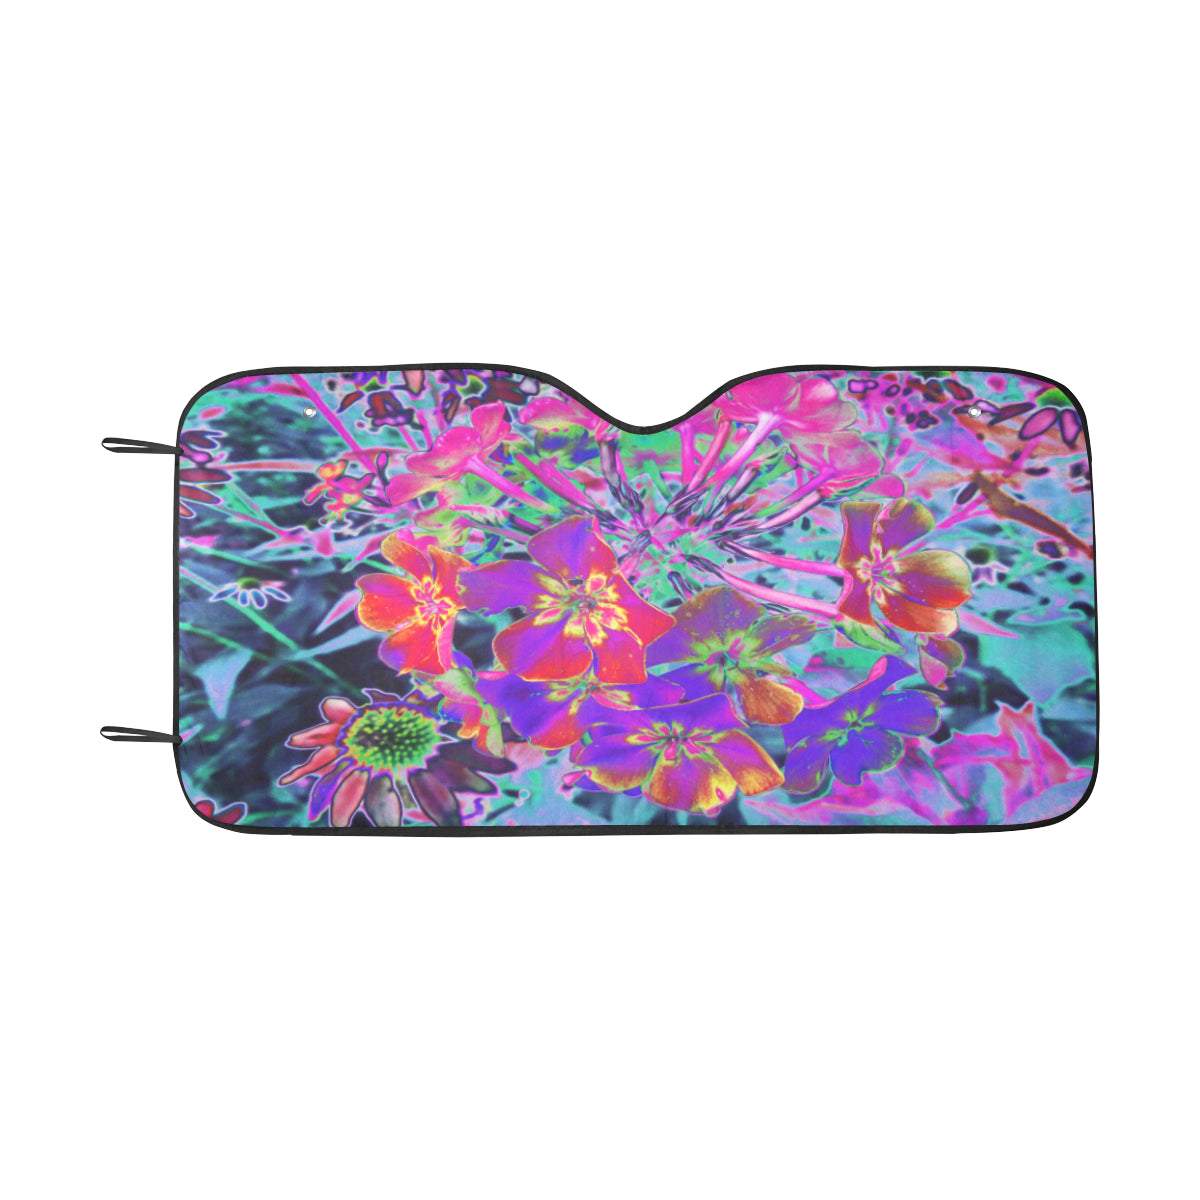 Auto Sun Shade, Dramatic Psychedelic Colorful Red and Purple Flowers